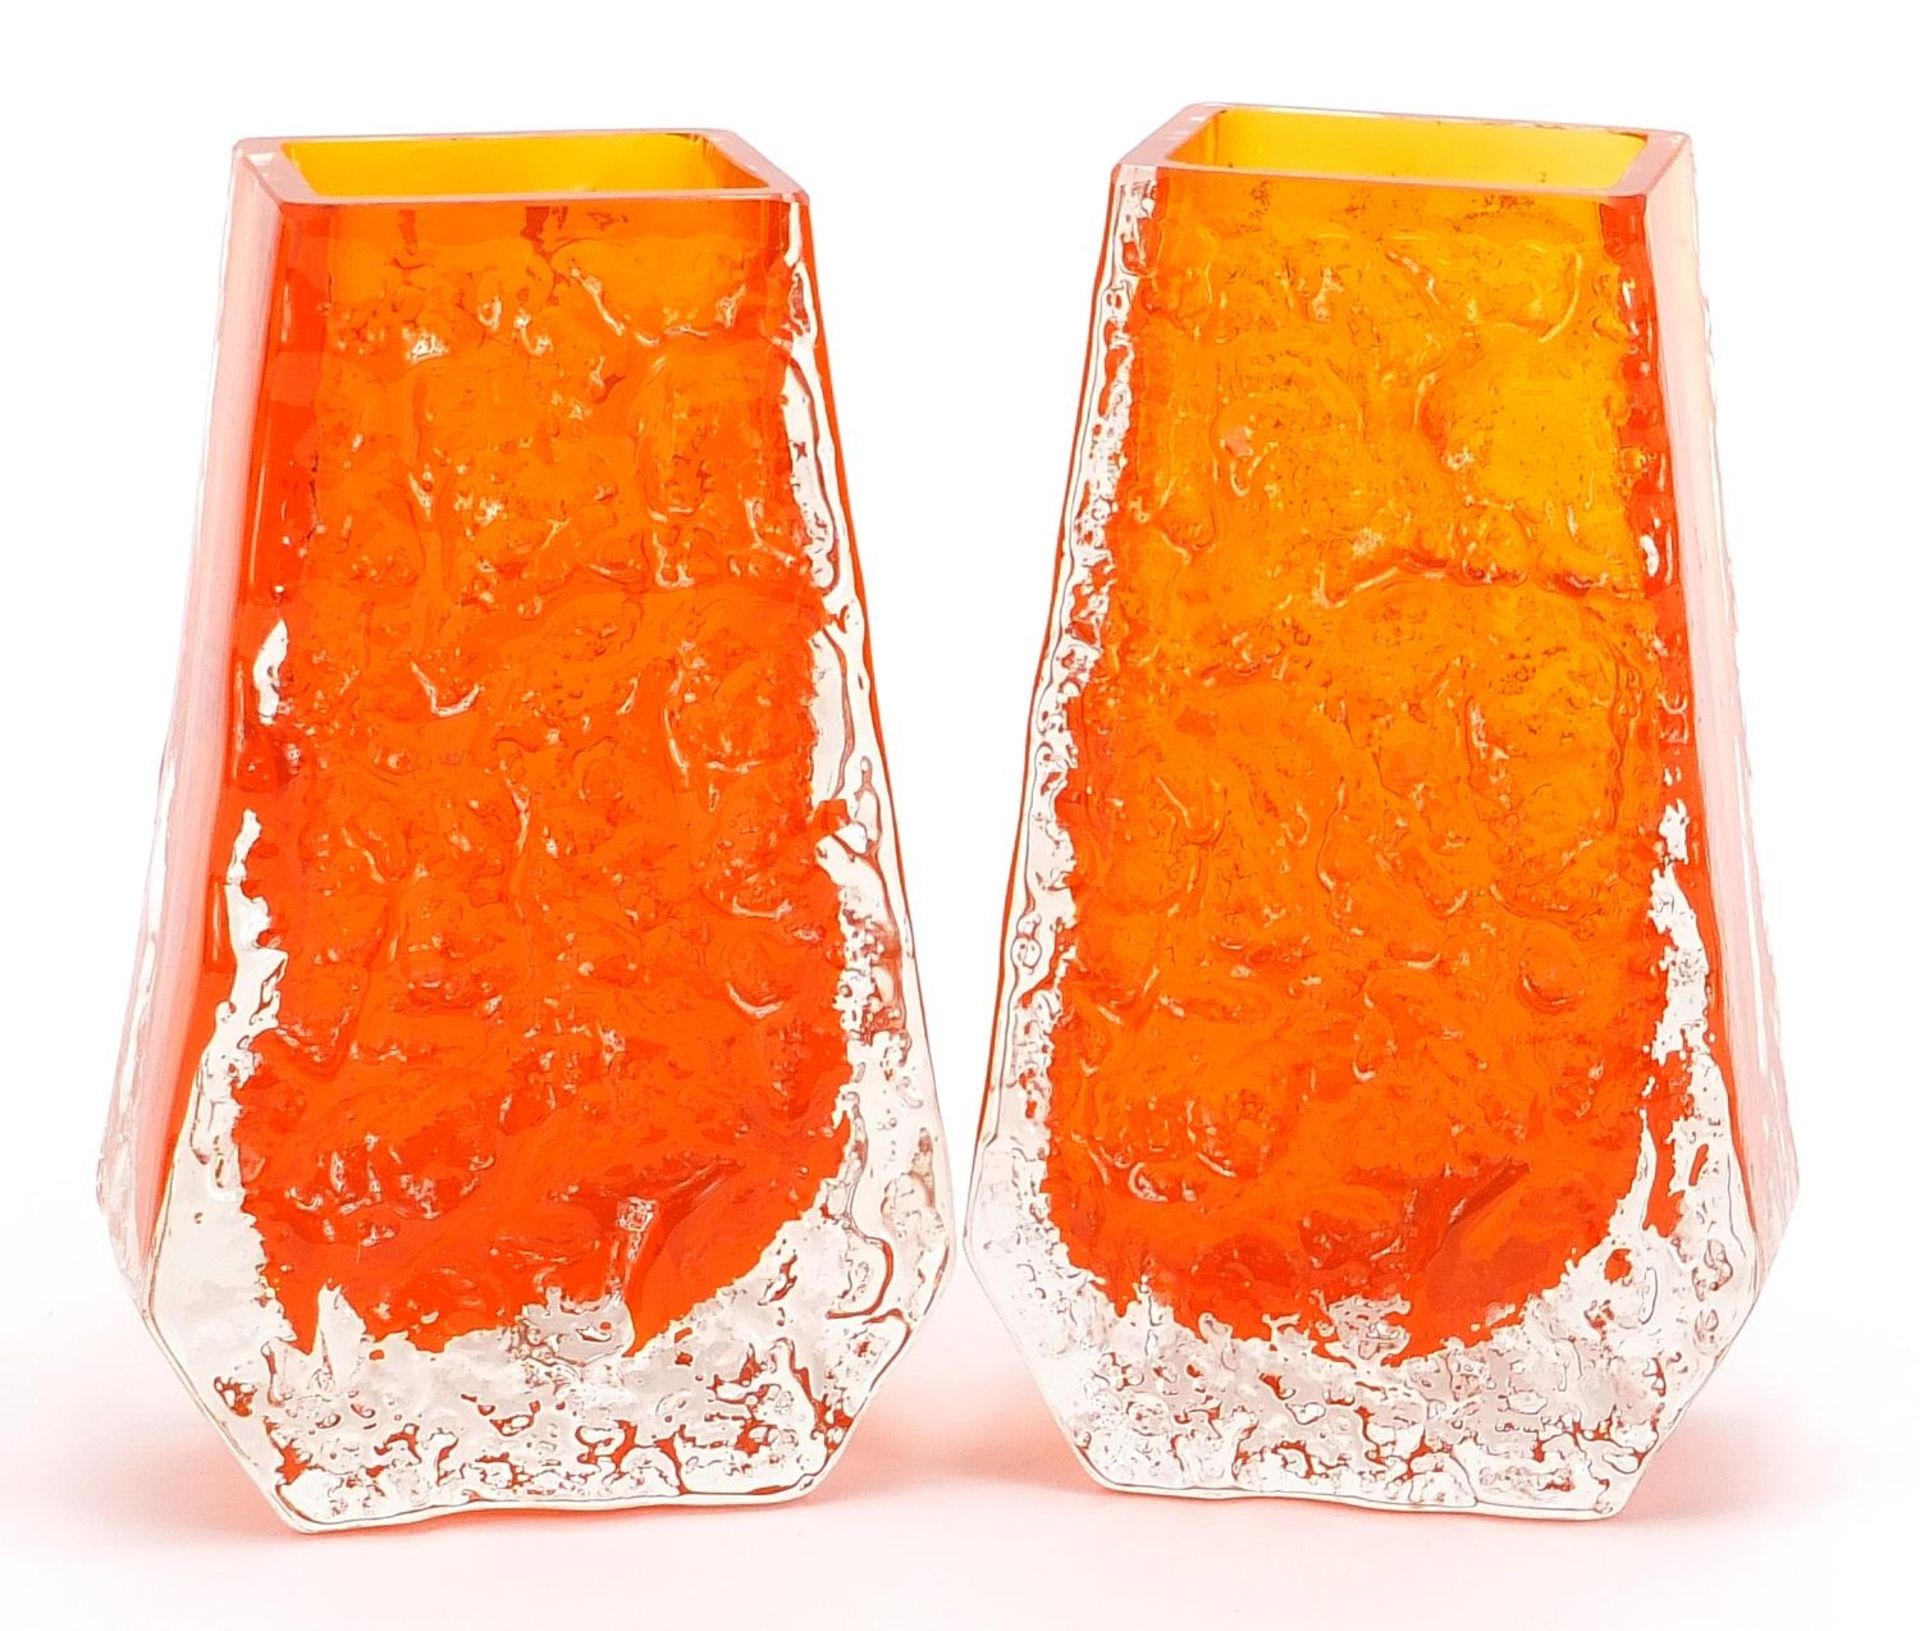 Geoffrey Baxter for Whitefriars, pair of coffin glass vases in tangerine, each 13.5cm high